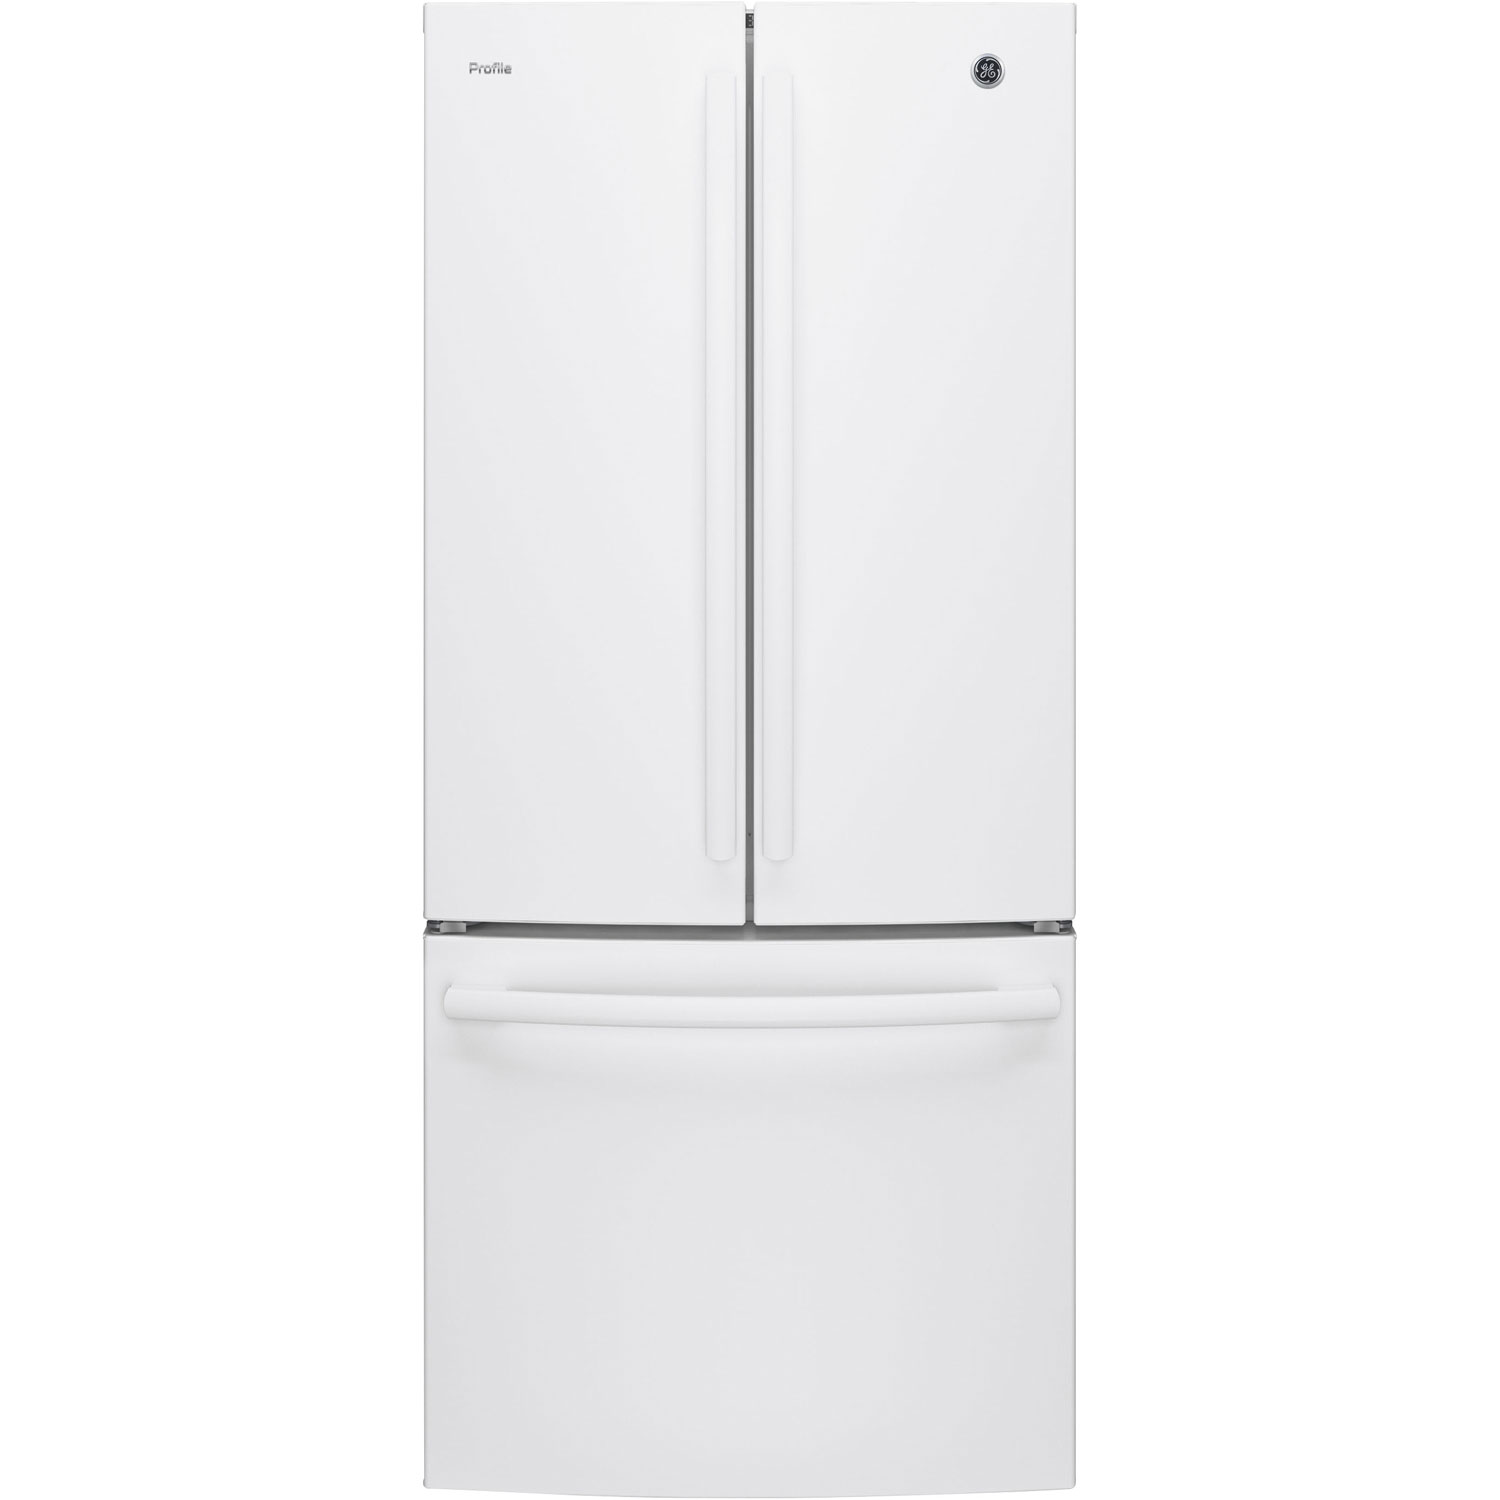 GE Profile 30" 20.8 Cu. Ft. French Door Refrigerator with Water Dispenser (PNE21NGLKWW) - White